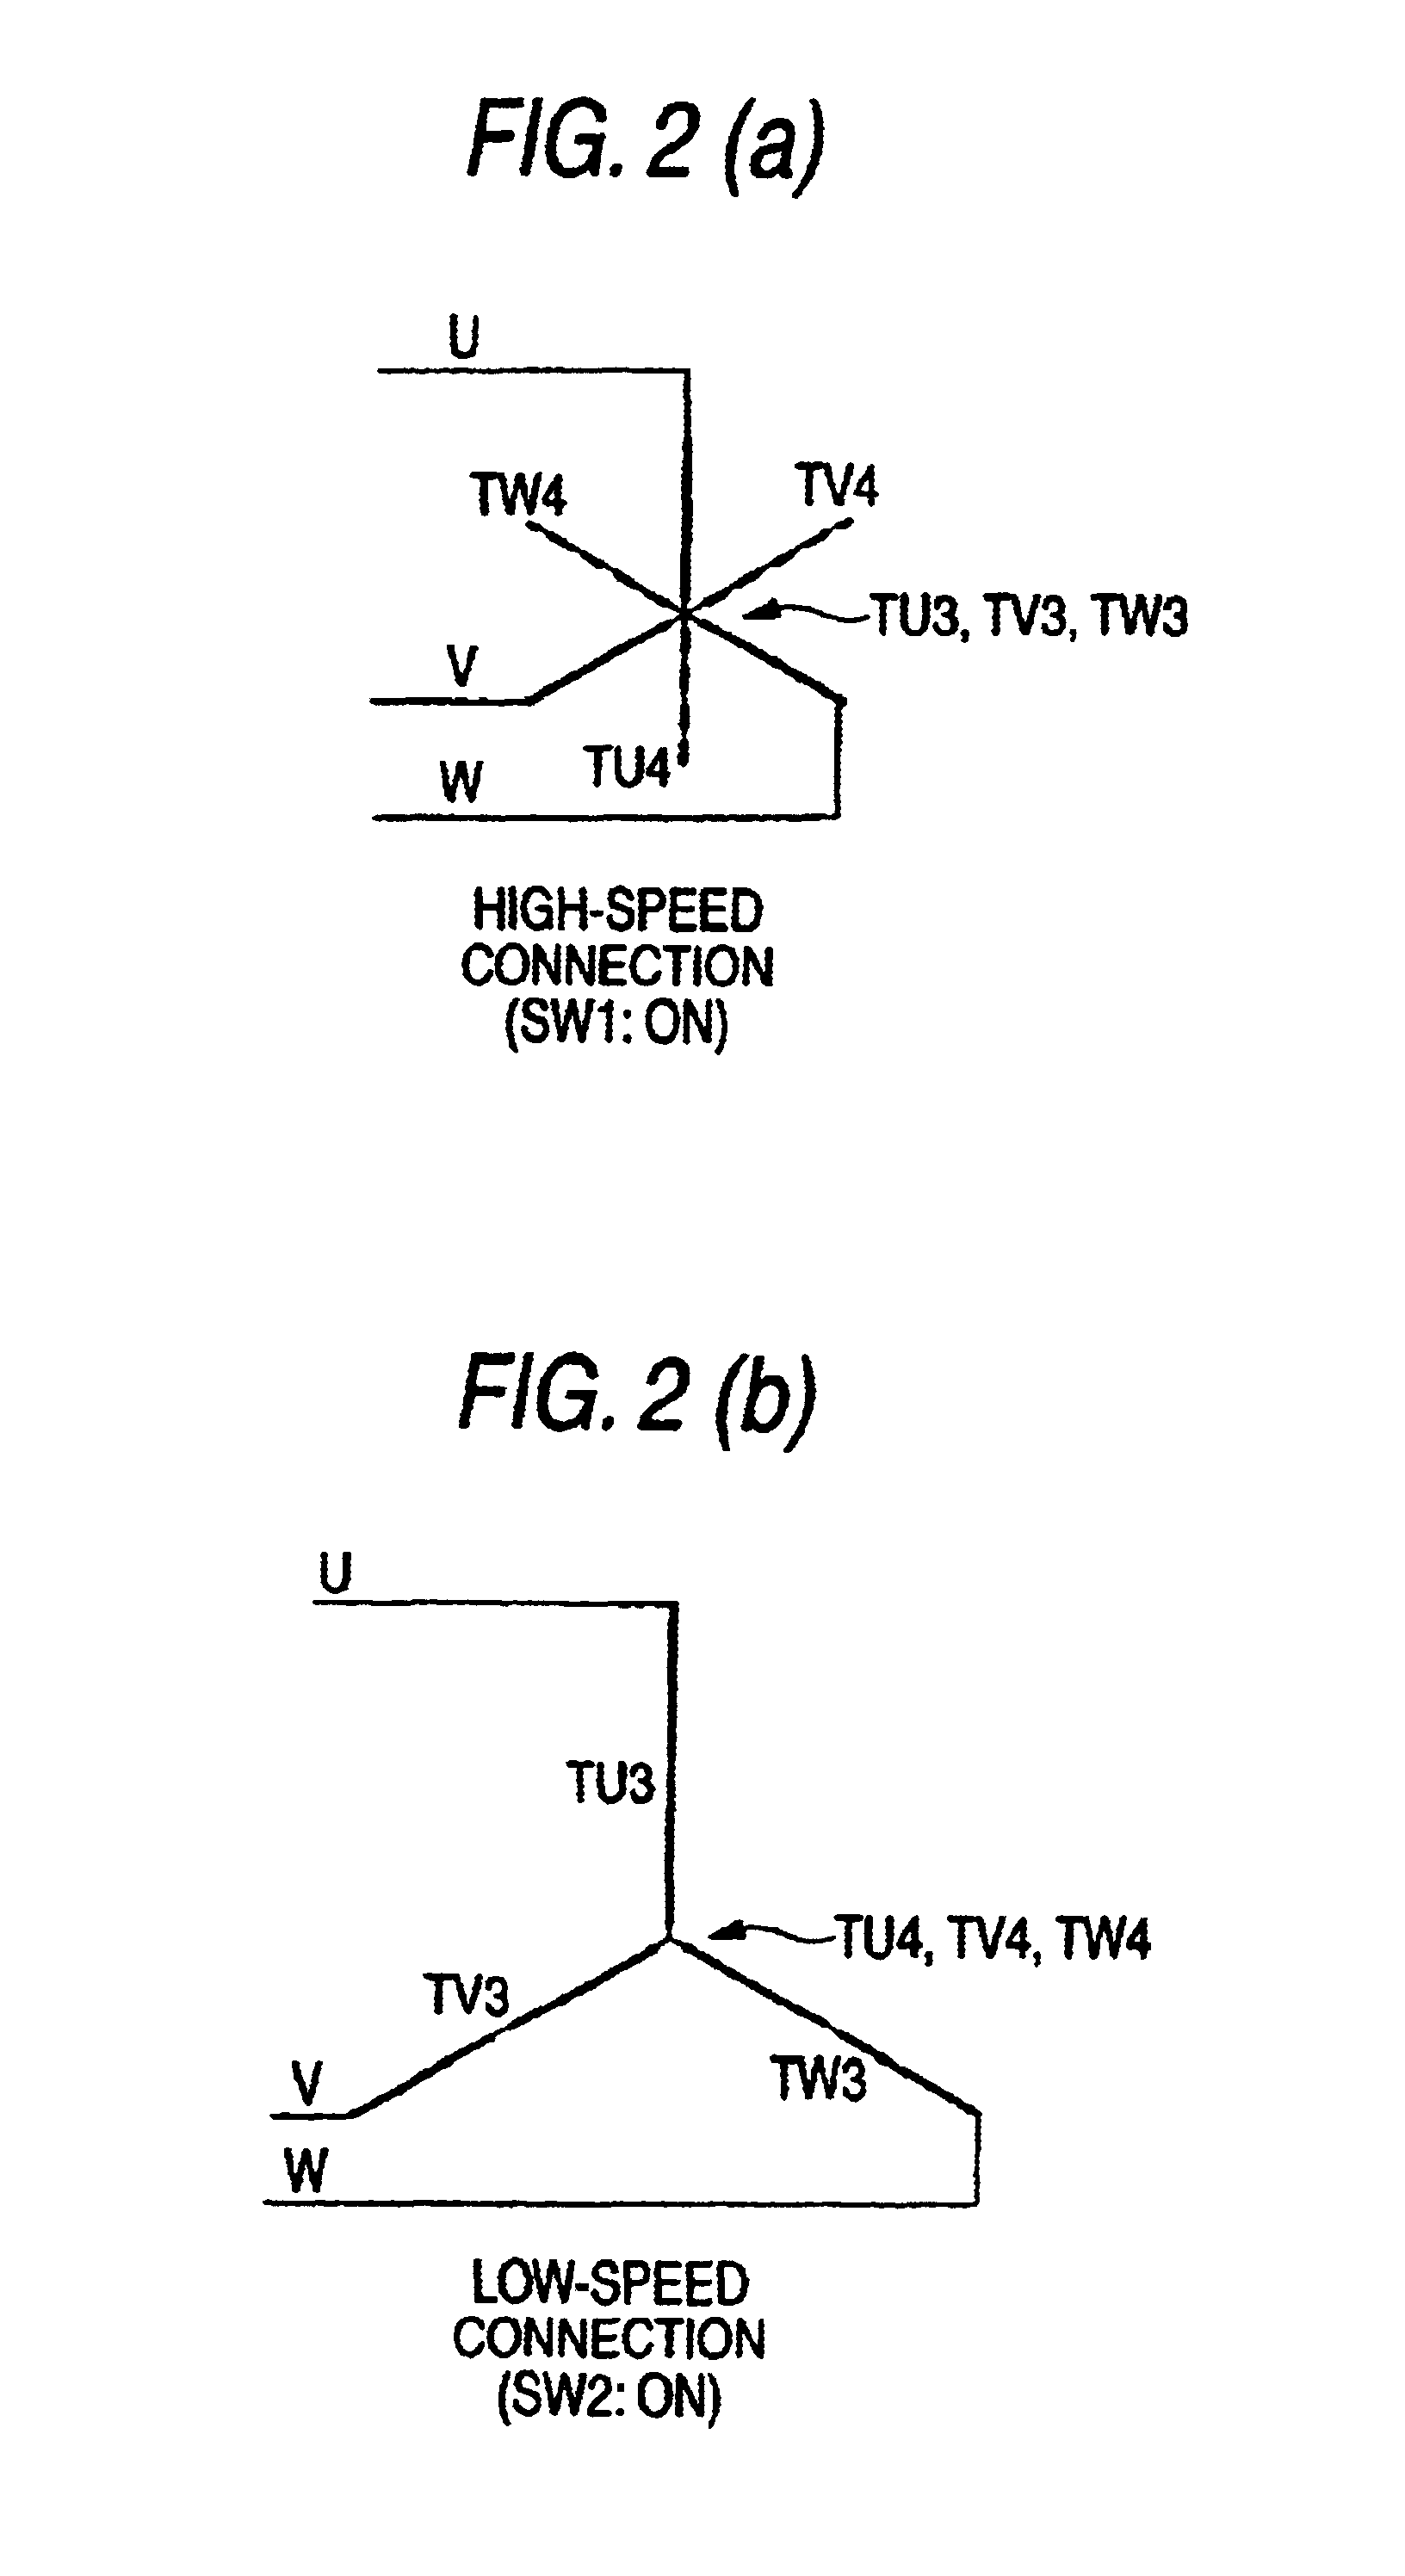 Apparatus for switching windings of AC three-phase motor